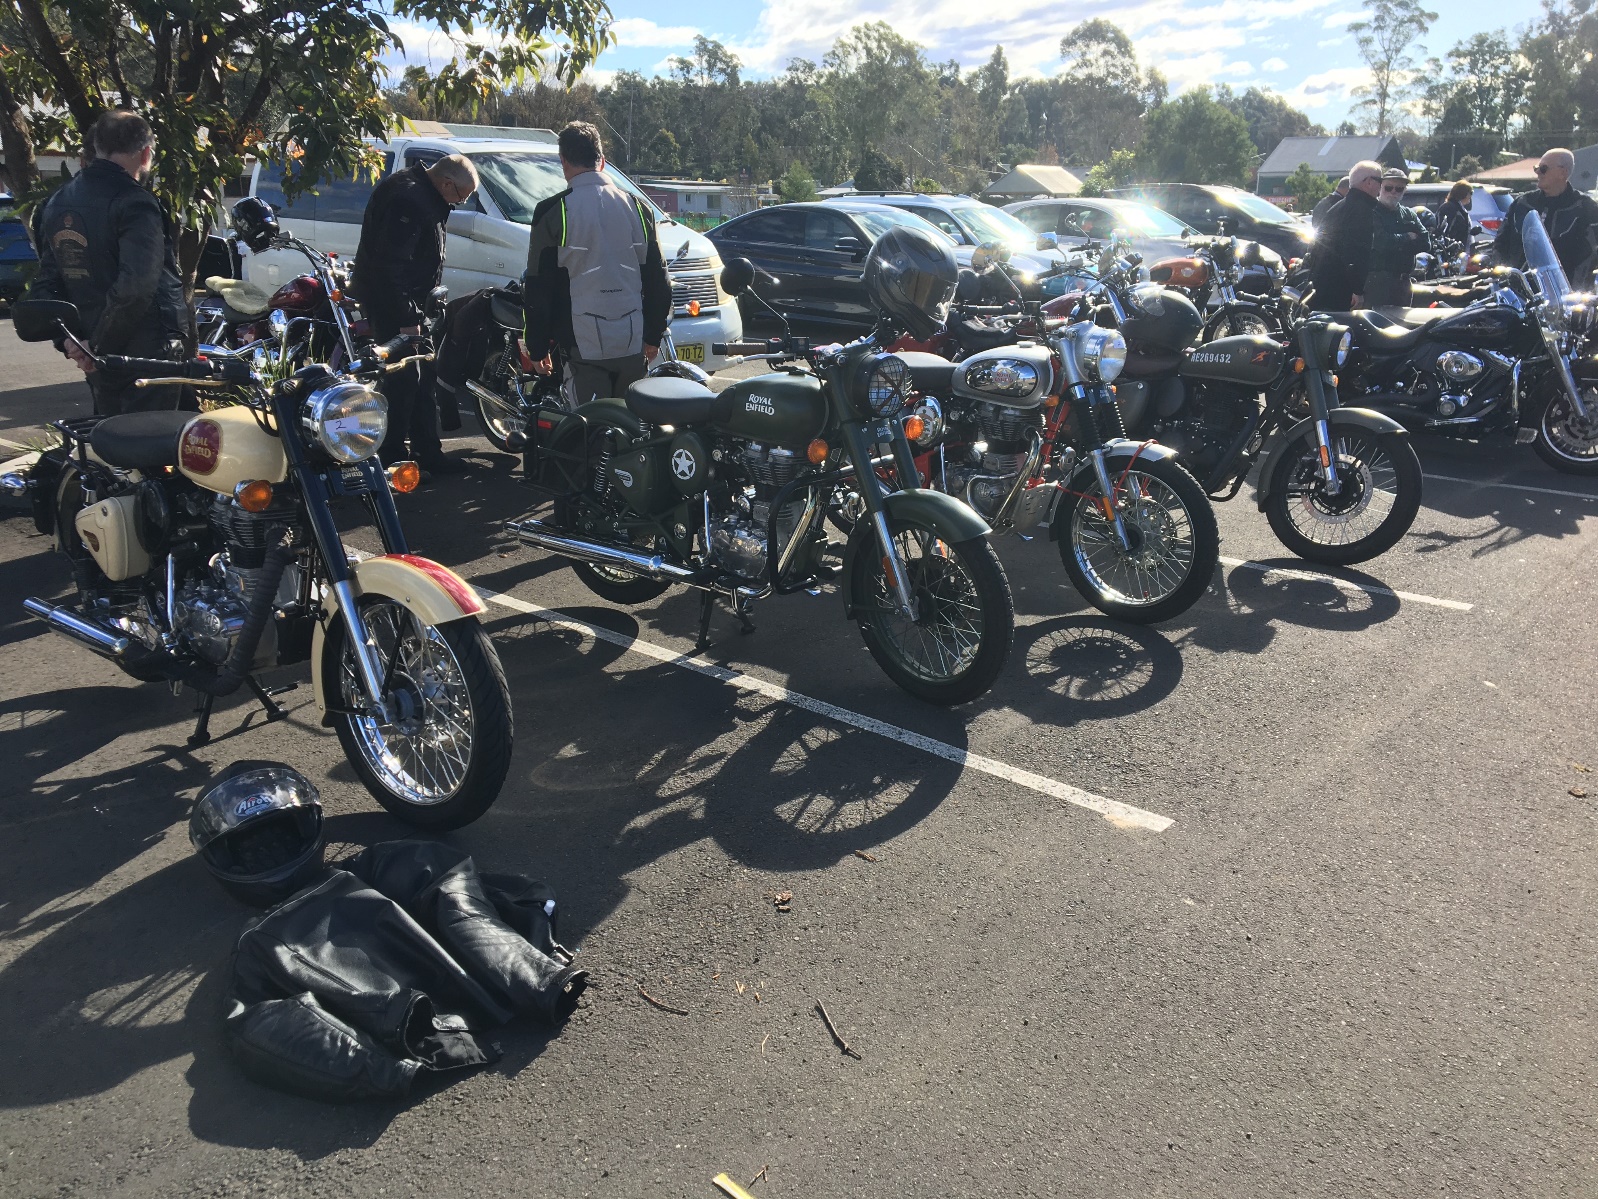 A group of motorcycles parked in a parking lot Description automatically generated with medium confidence